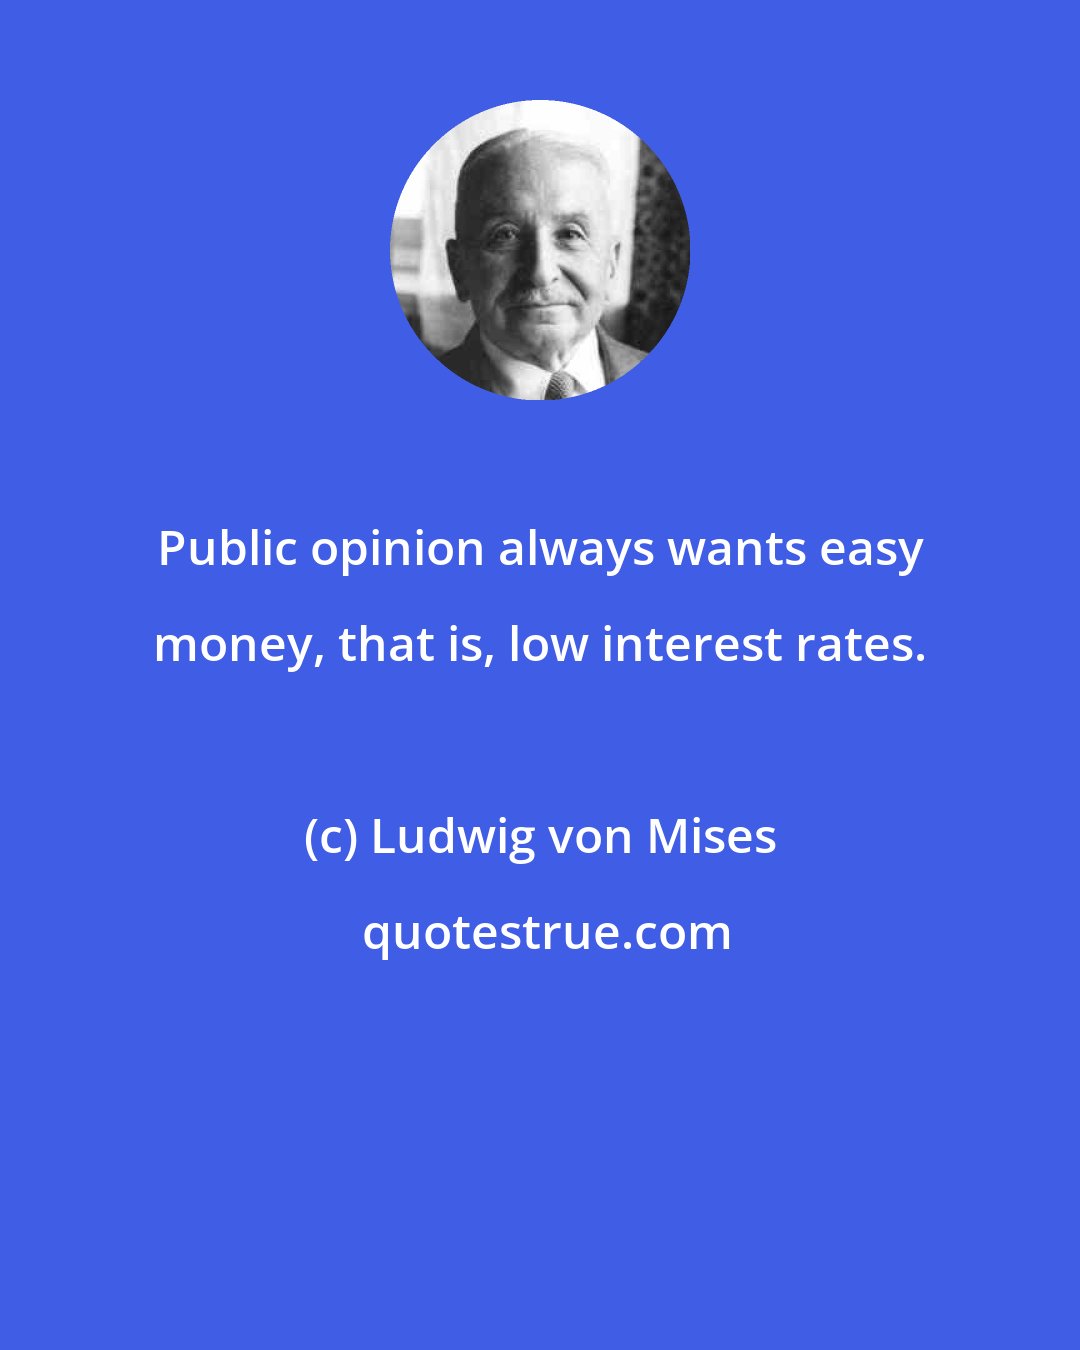 Ludwig von Mises: Public opinion always wants easy money, that is, low interest rates.